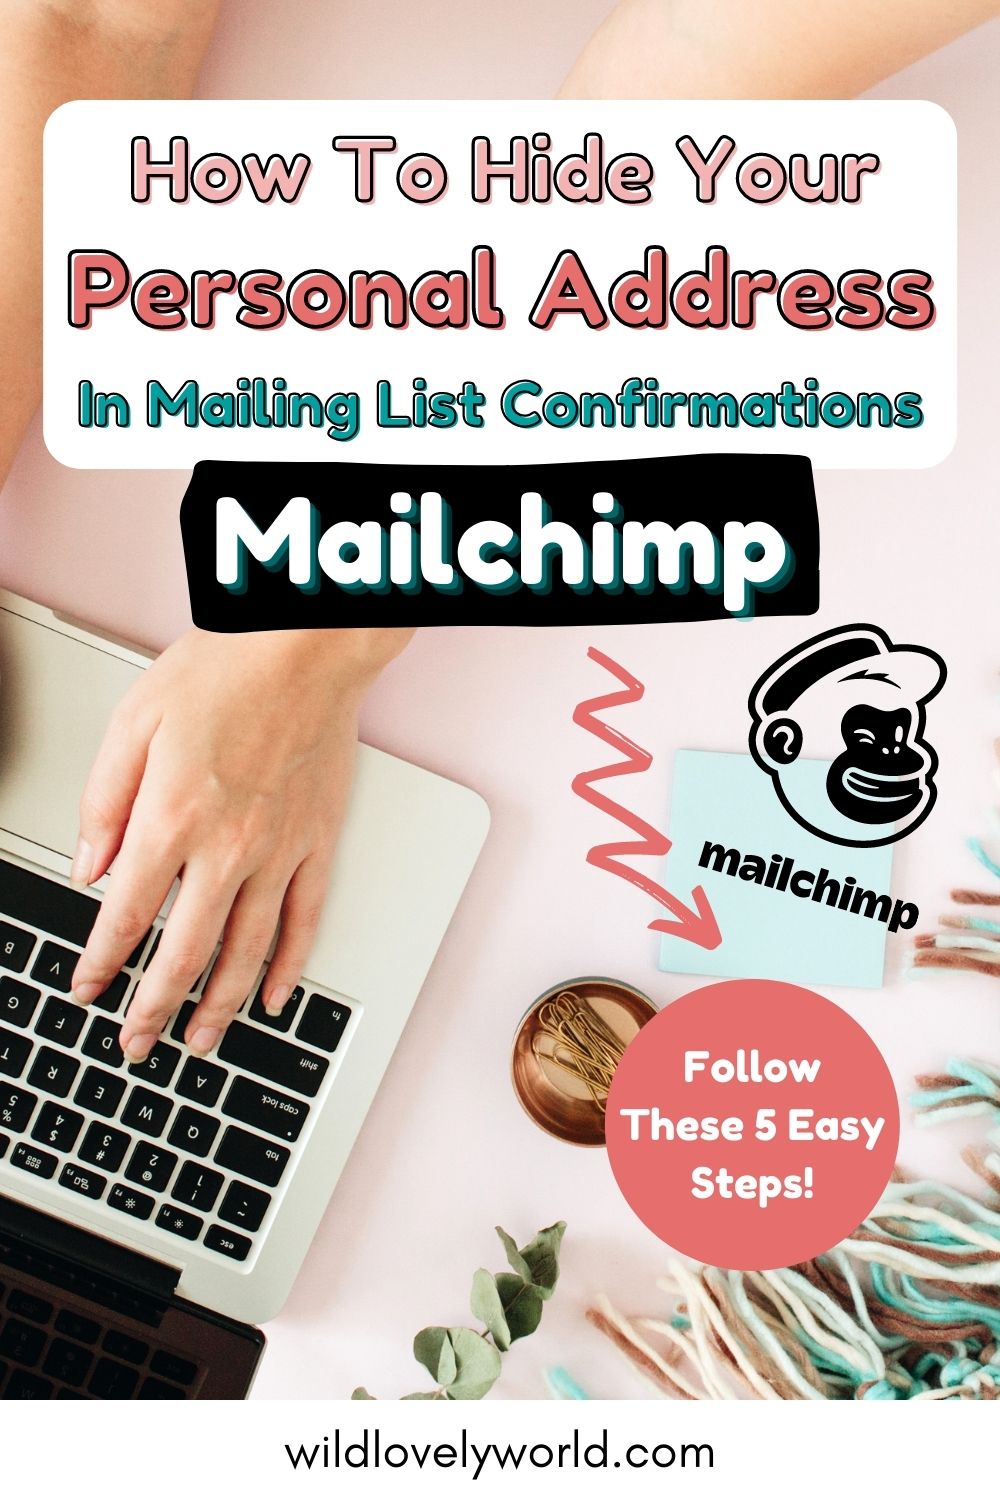 how to hide your address in mailchimp confirmations